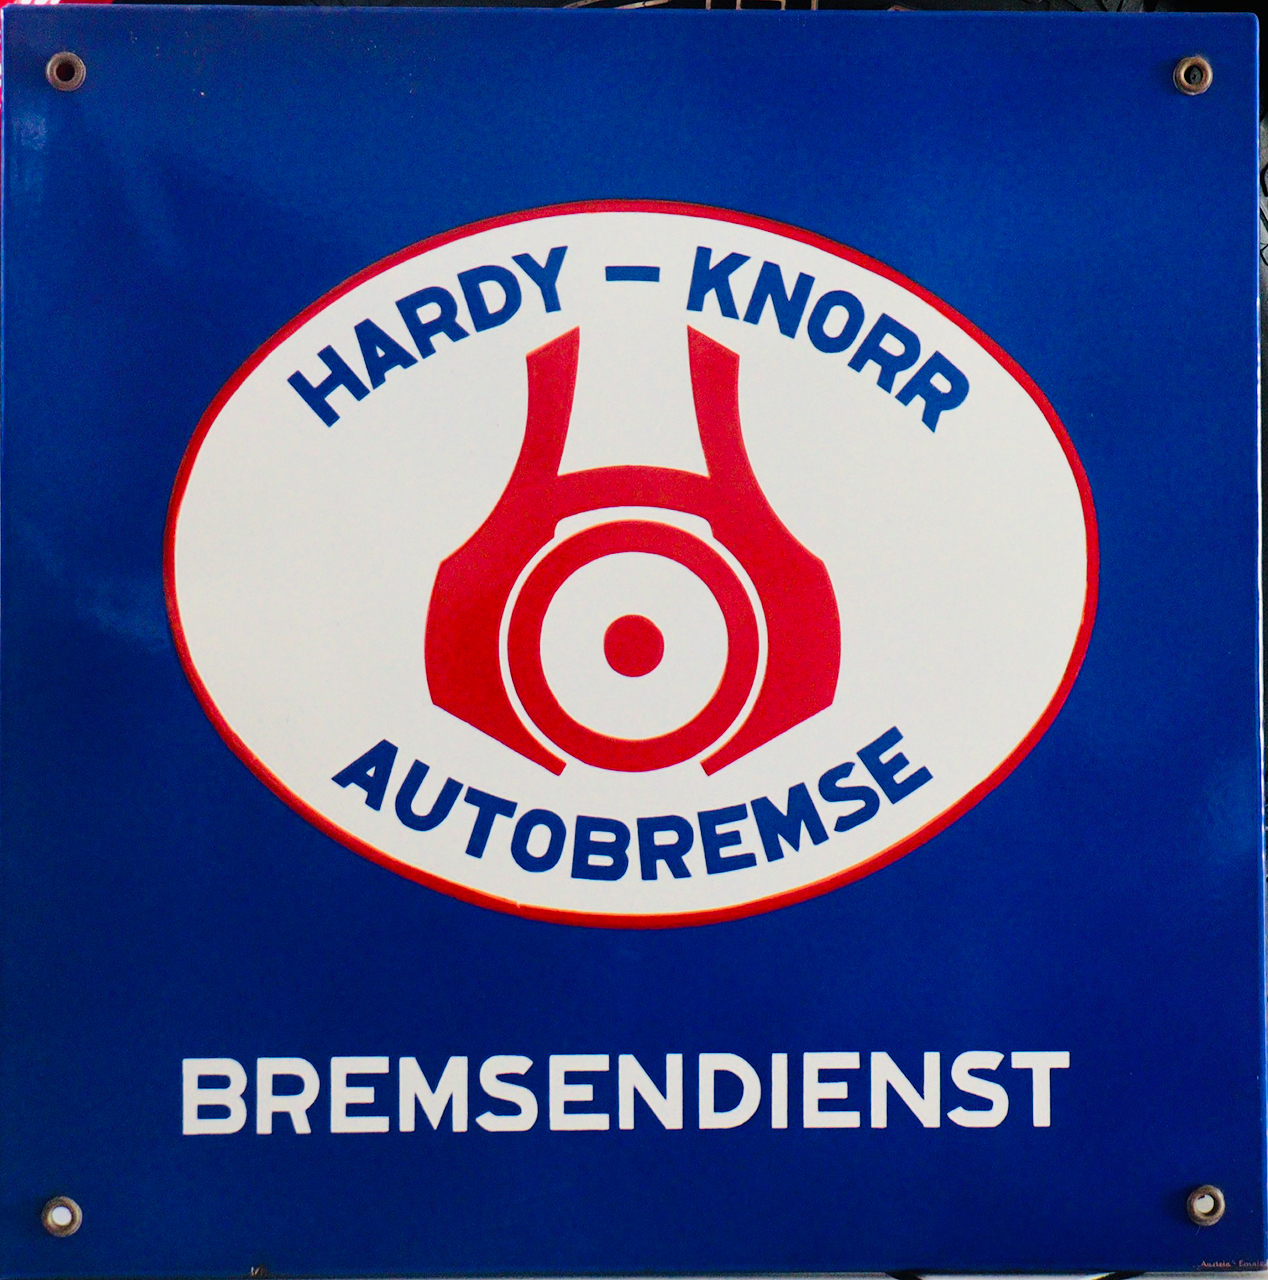 Hardy - Knorr